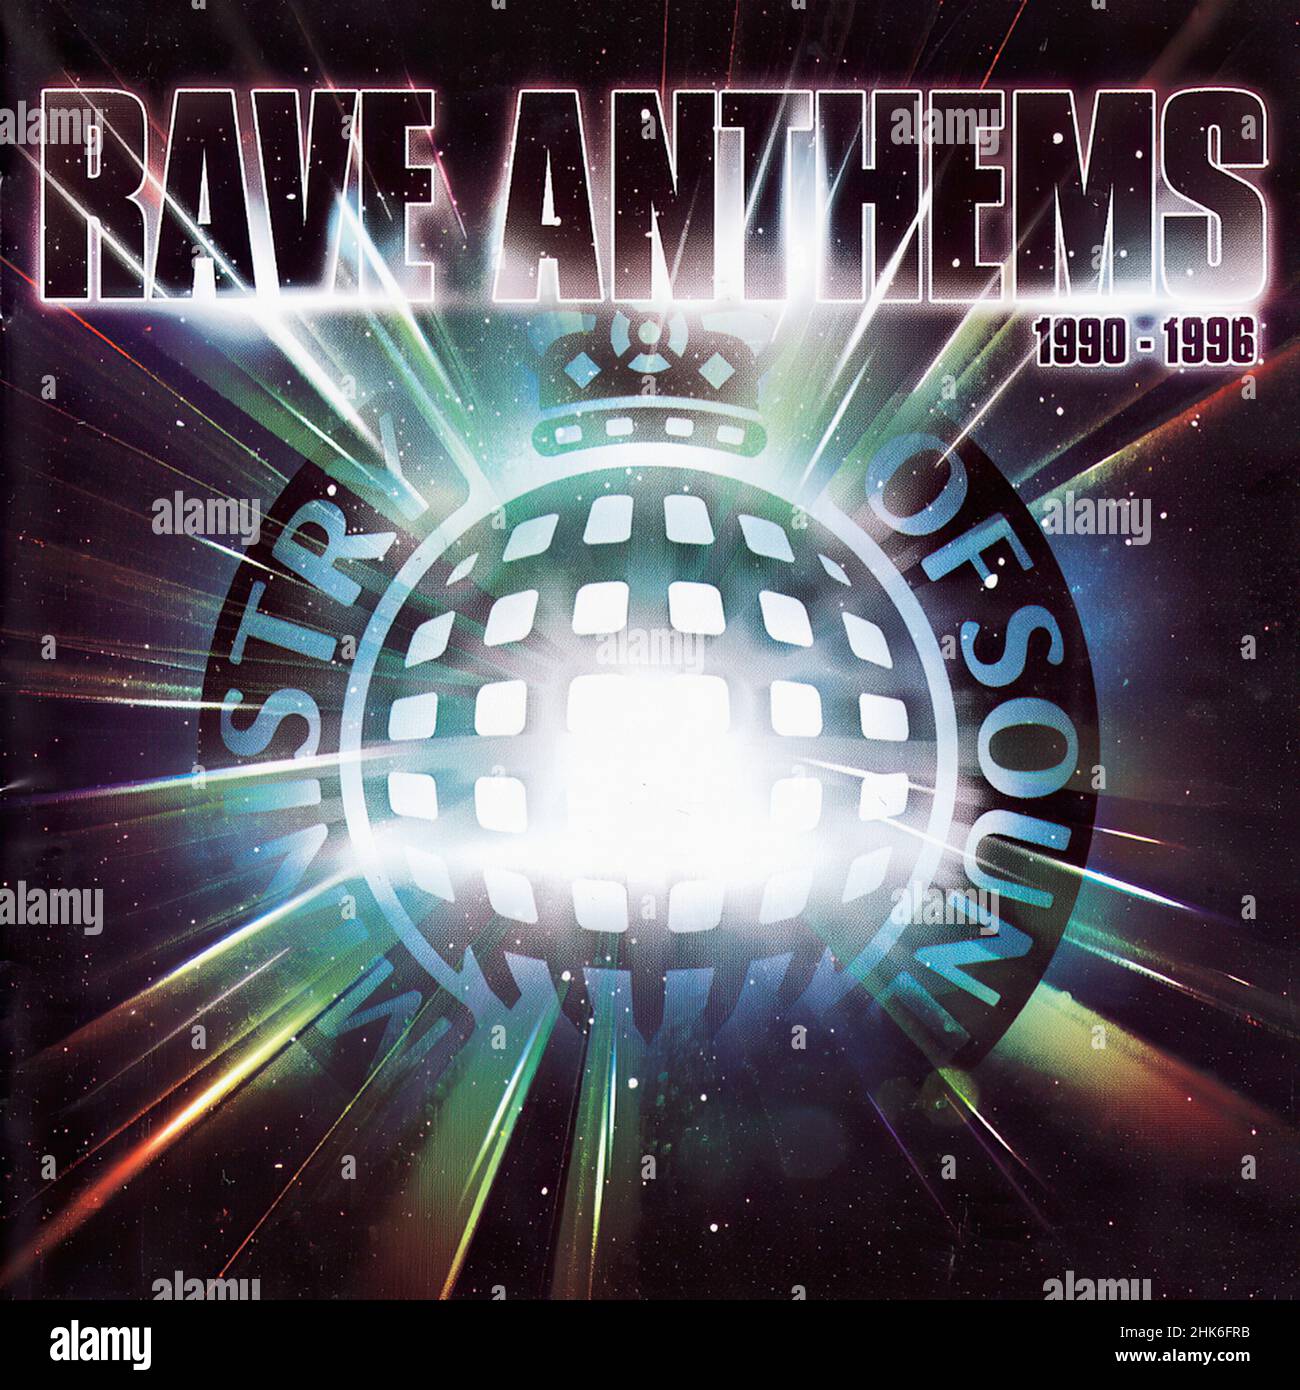 Vintage vinyl record cover -  Ministry Of Sound -  Rave Anthems 1990 - 1996 00003 Stock Photo